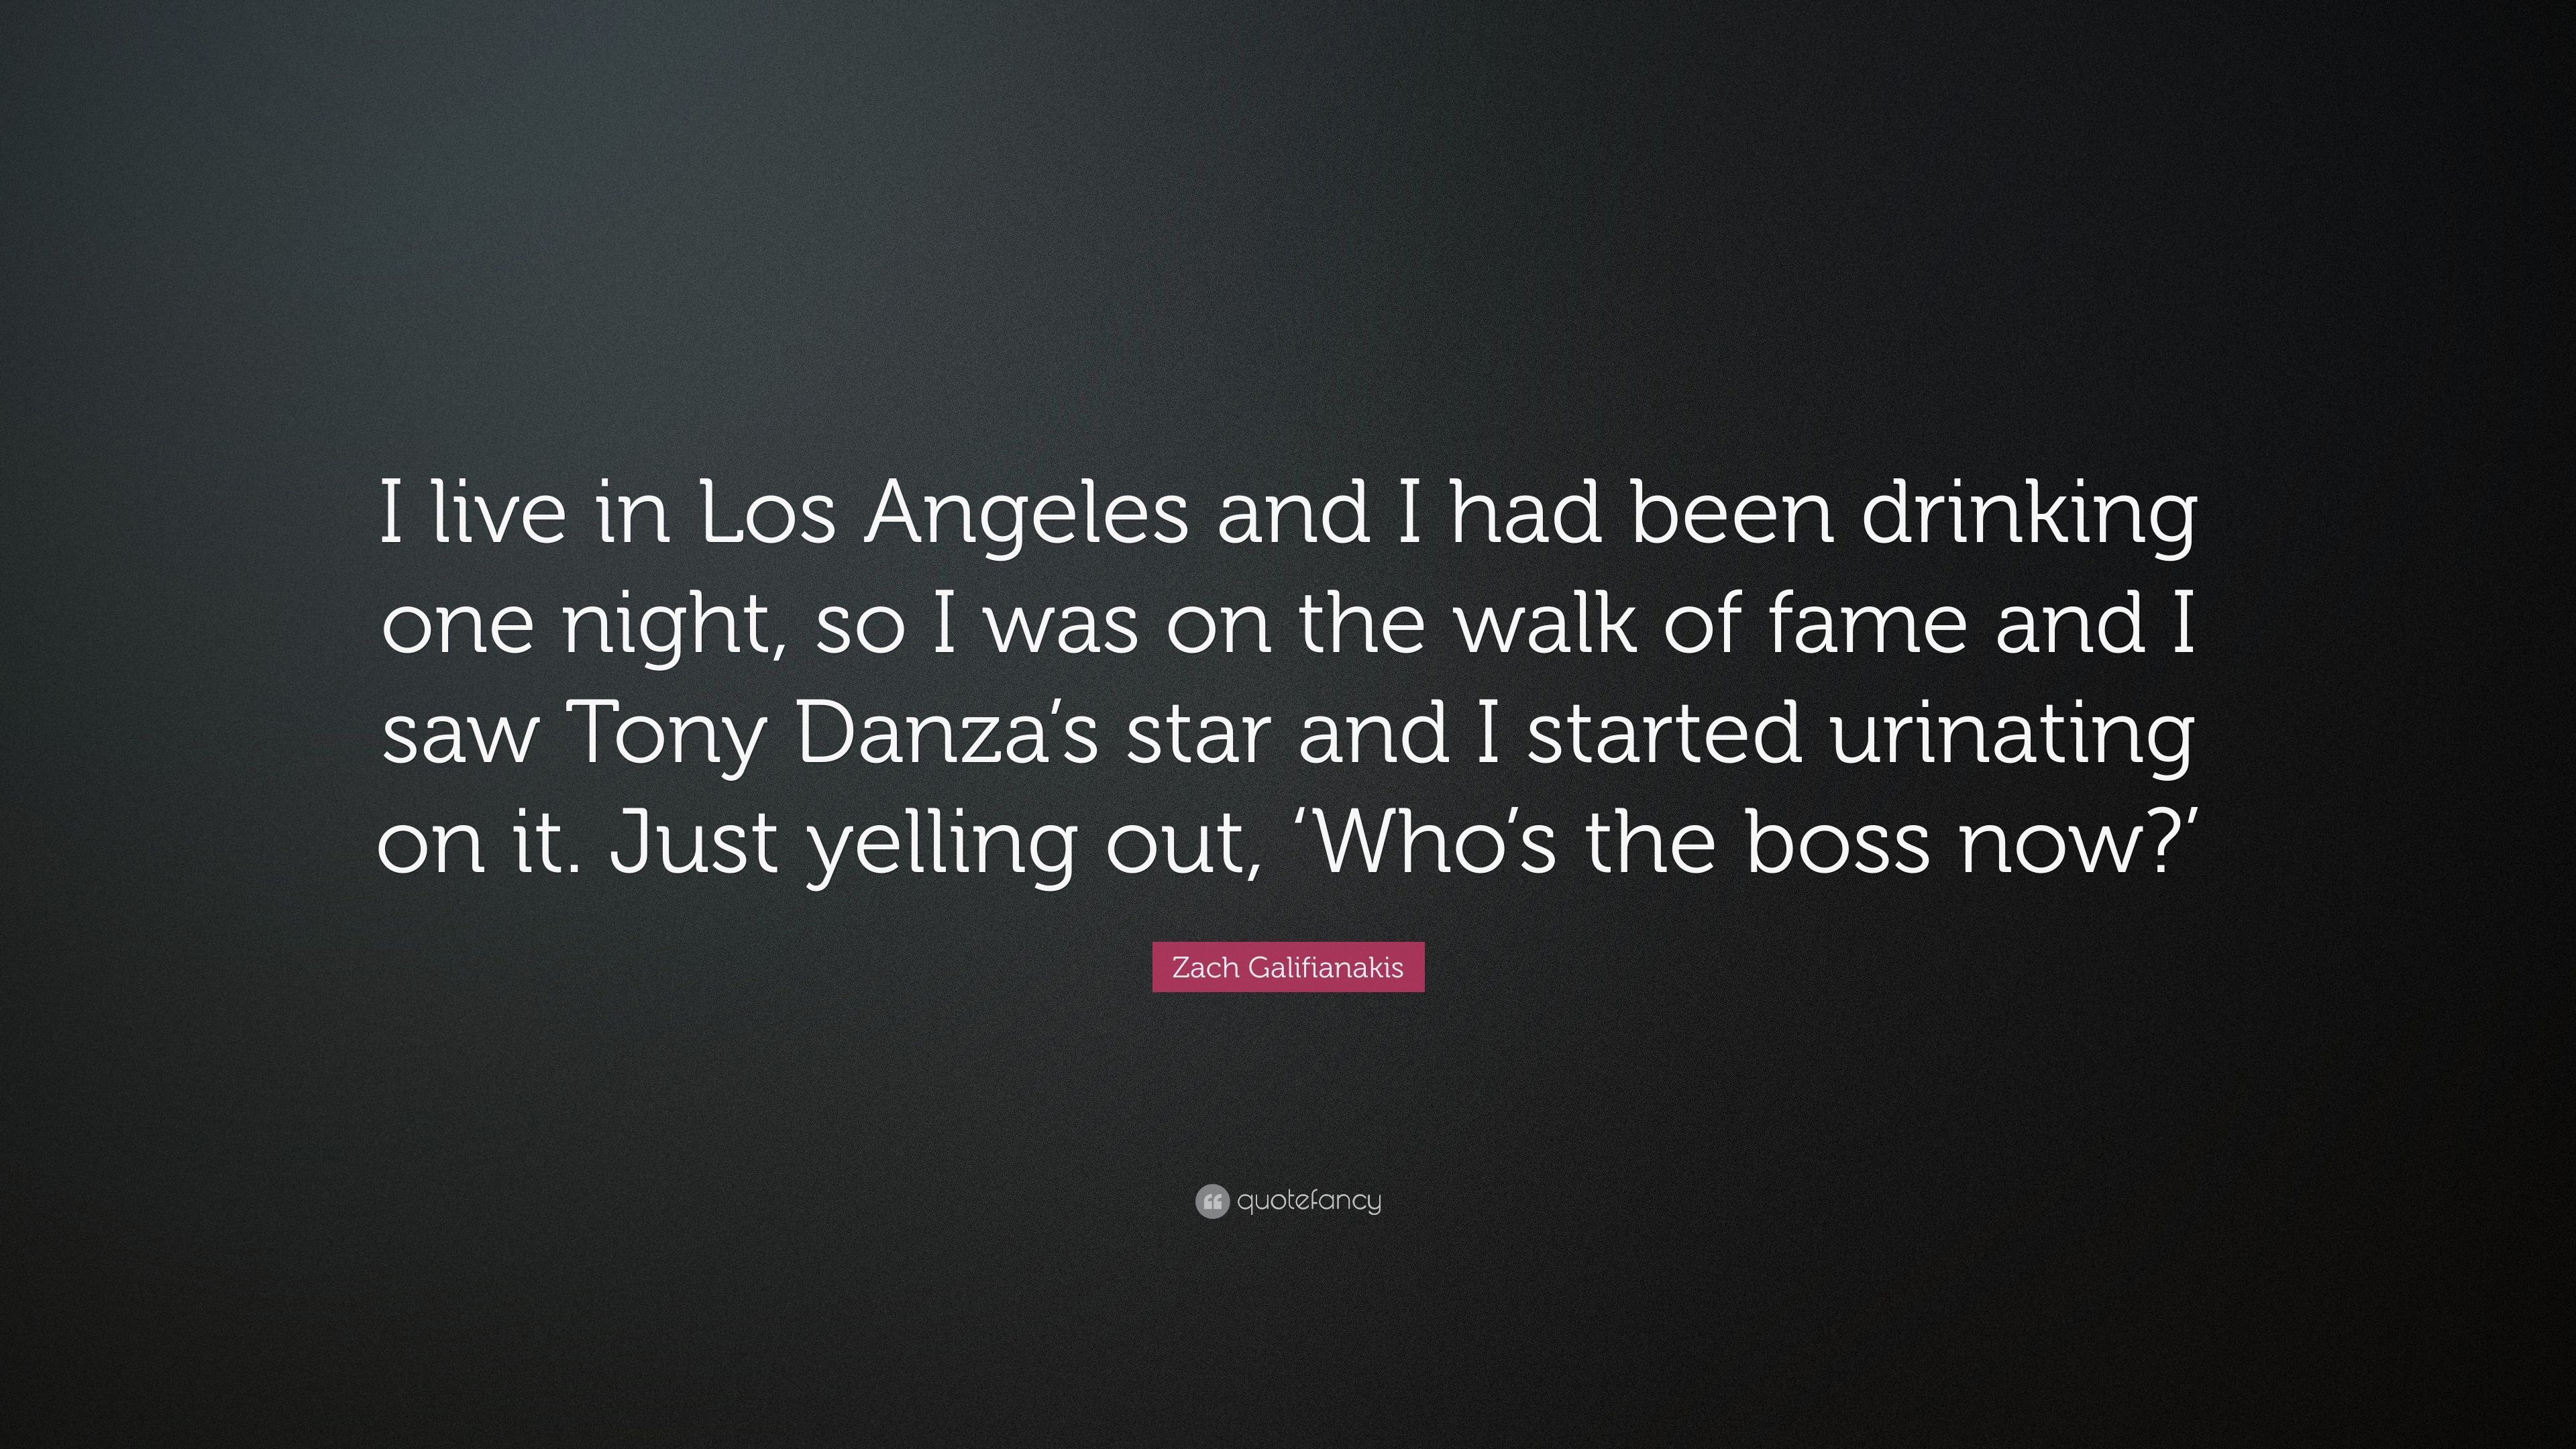 Zach Galifianakis Quote: "I live in Los Angeles and I had been.